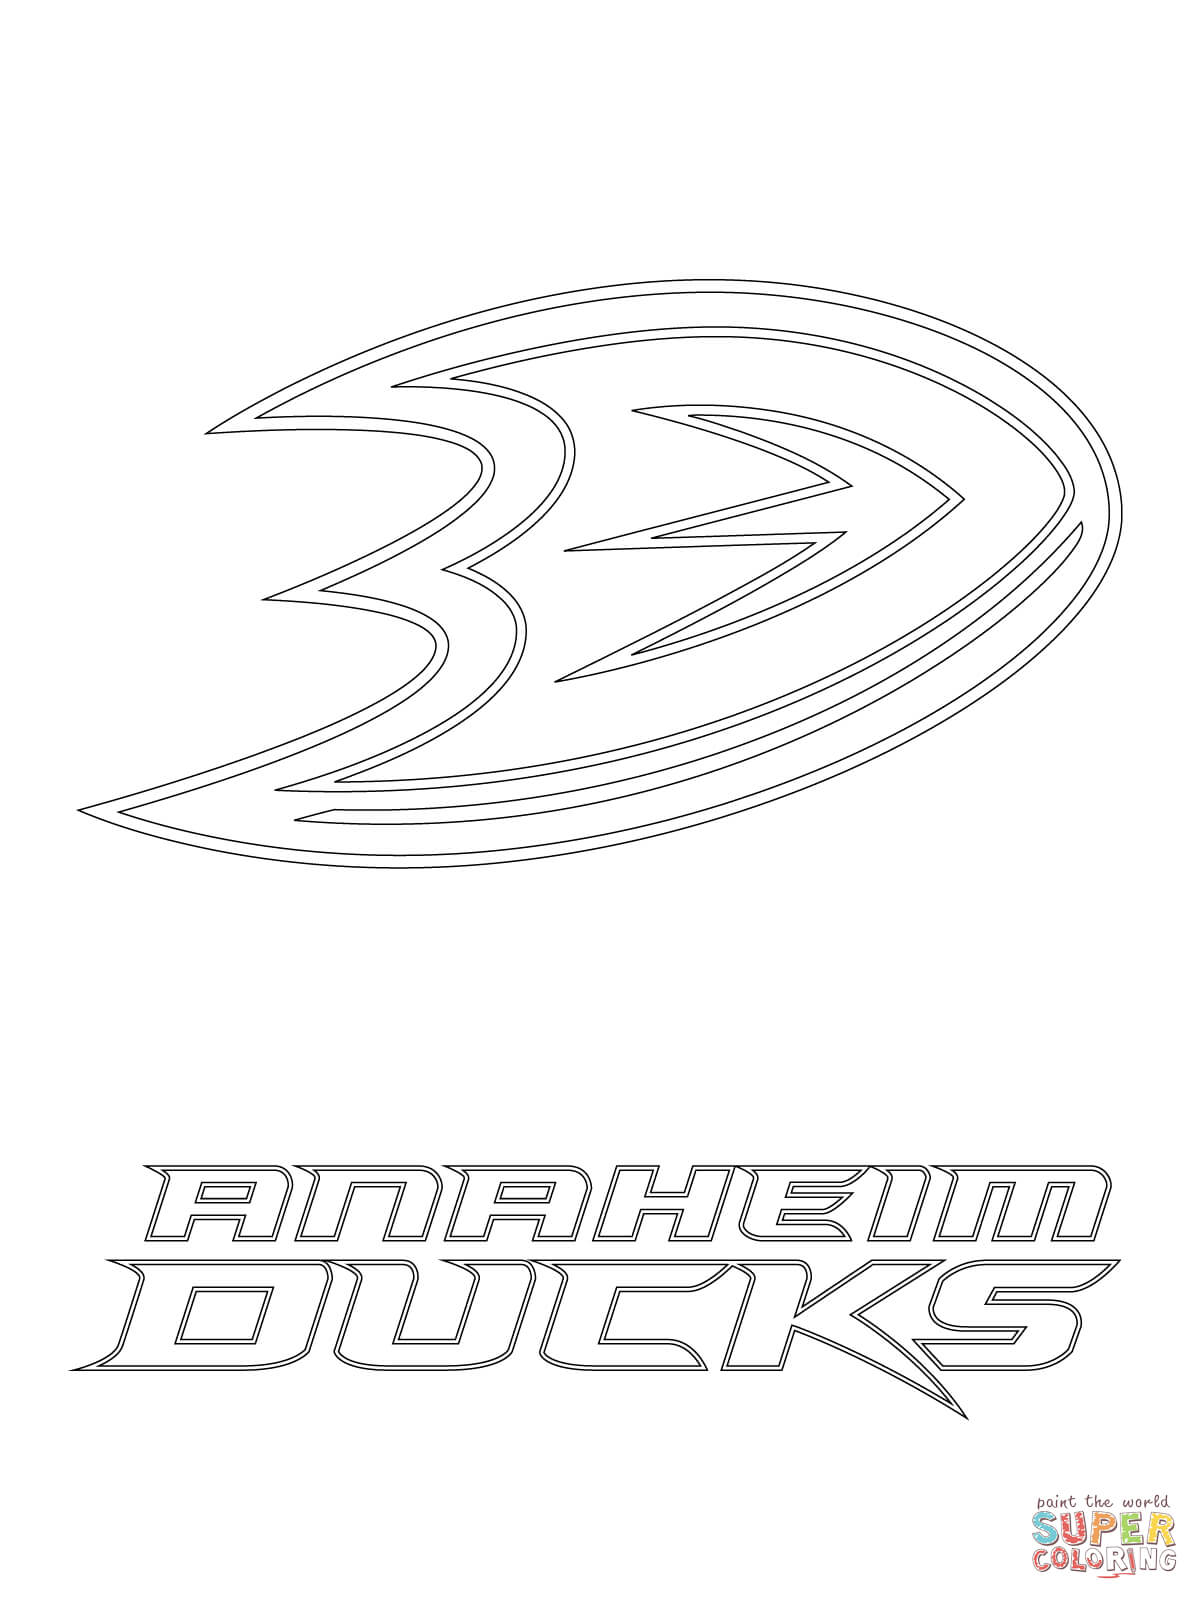 Anaheim Ducks Logo coloring page | Free Printable Coloring Pages